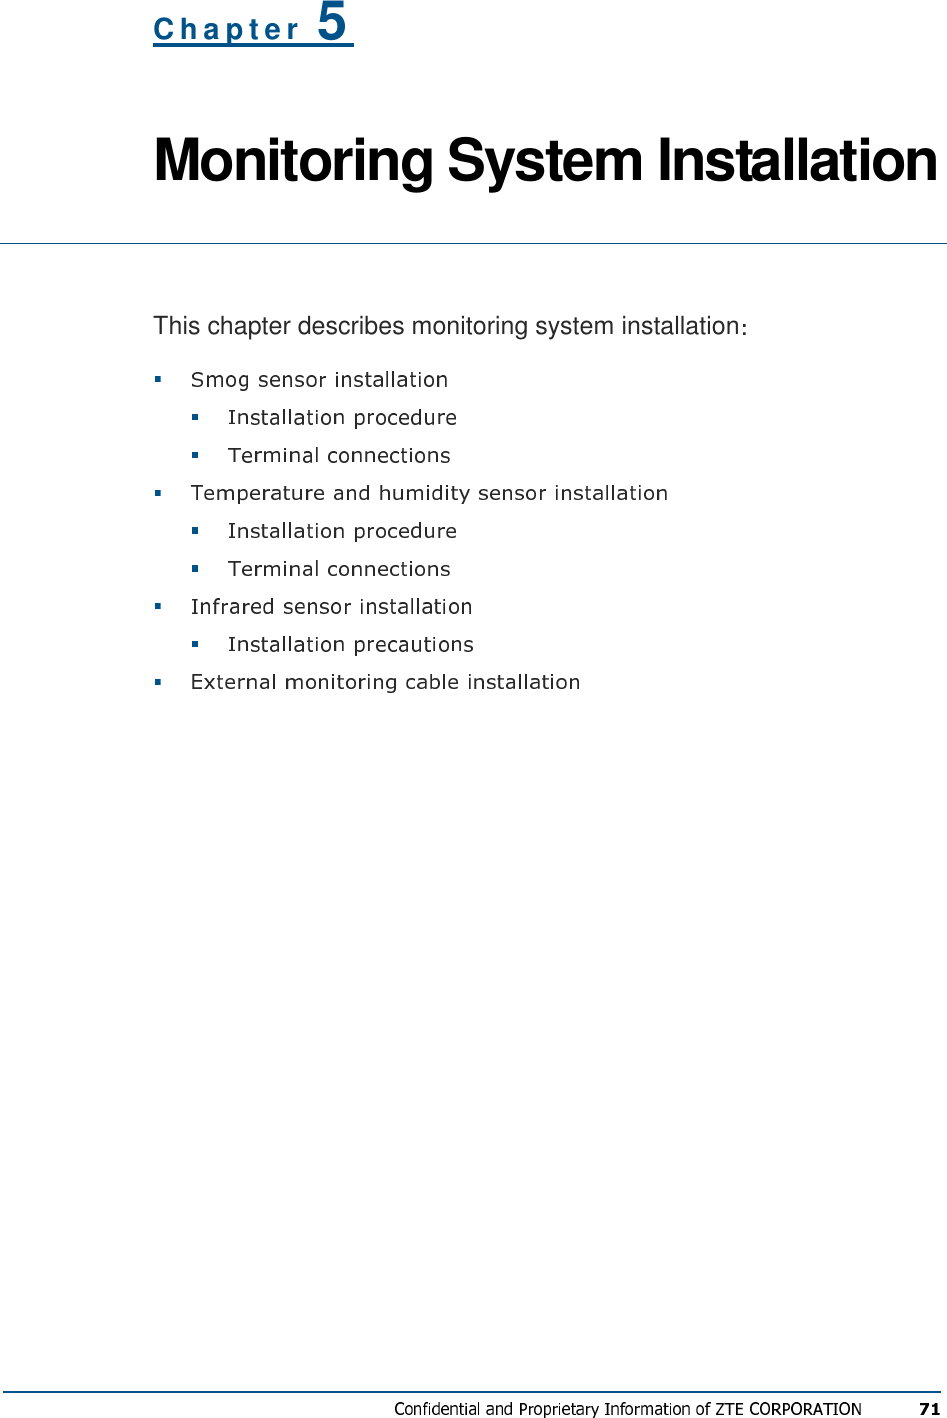 C h a p t e r   5 Monitoring System Installation  This chapter describes monitoring system installation         